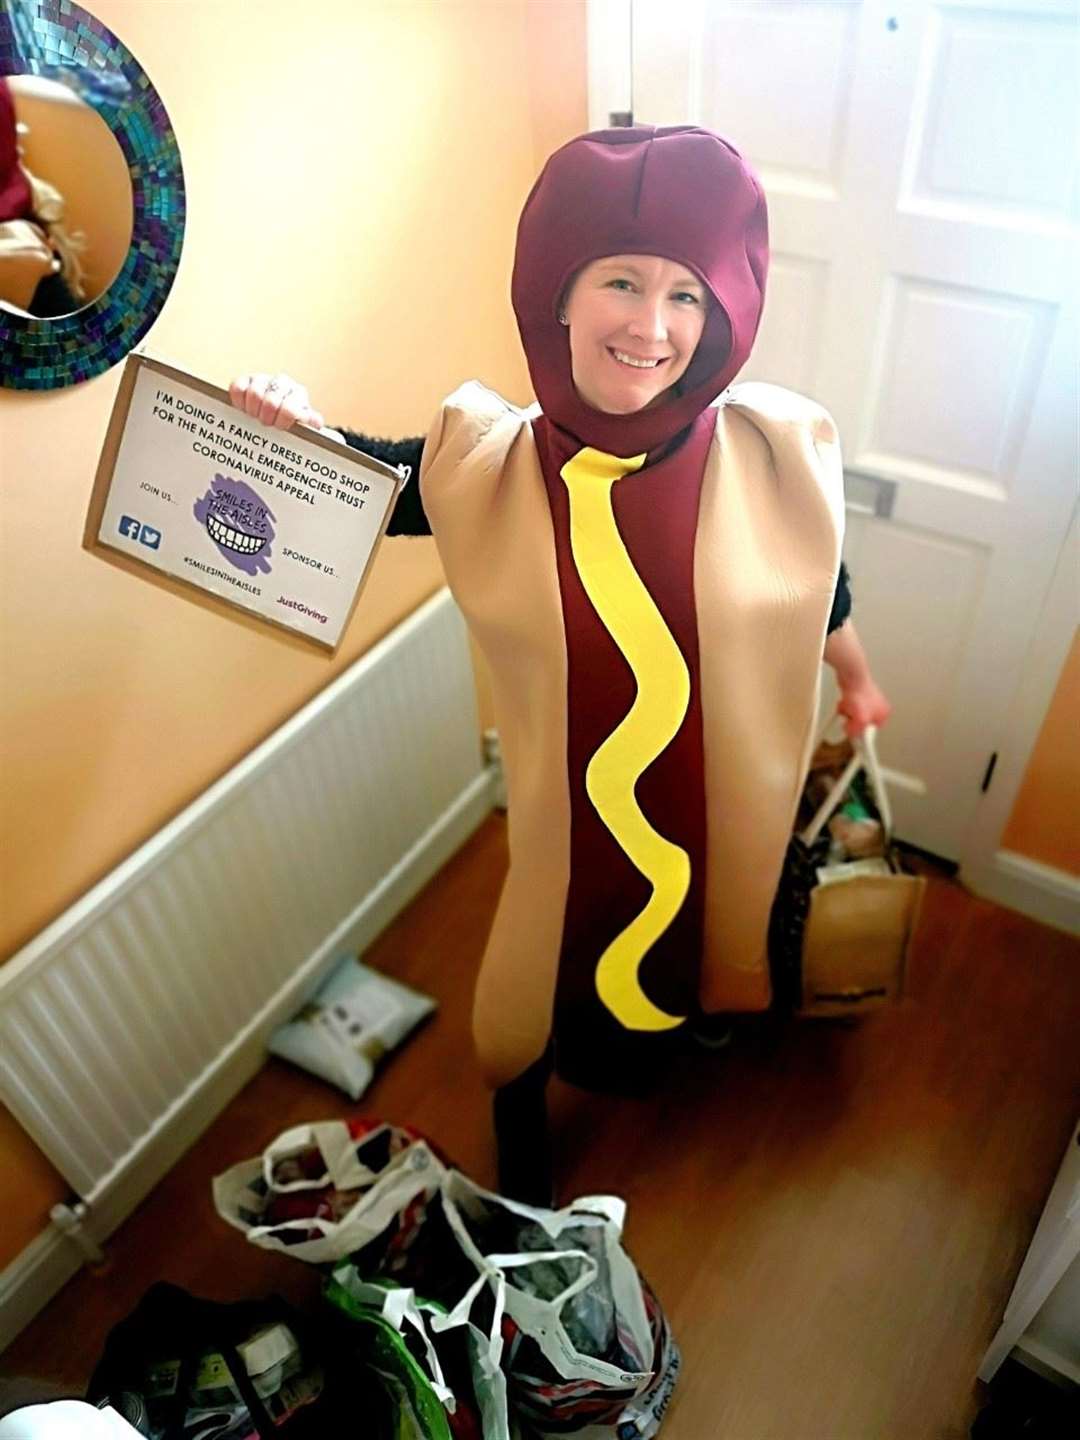 Laura has been doing her weekly shop in fancy dress to raise money for a national coronavirus appeal. Picture: Laura Winter